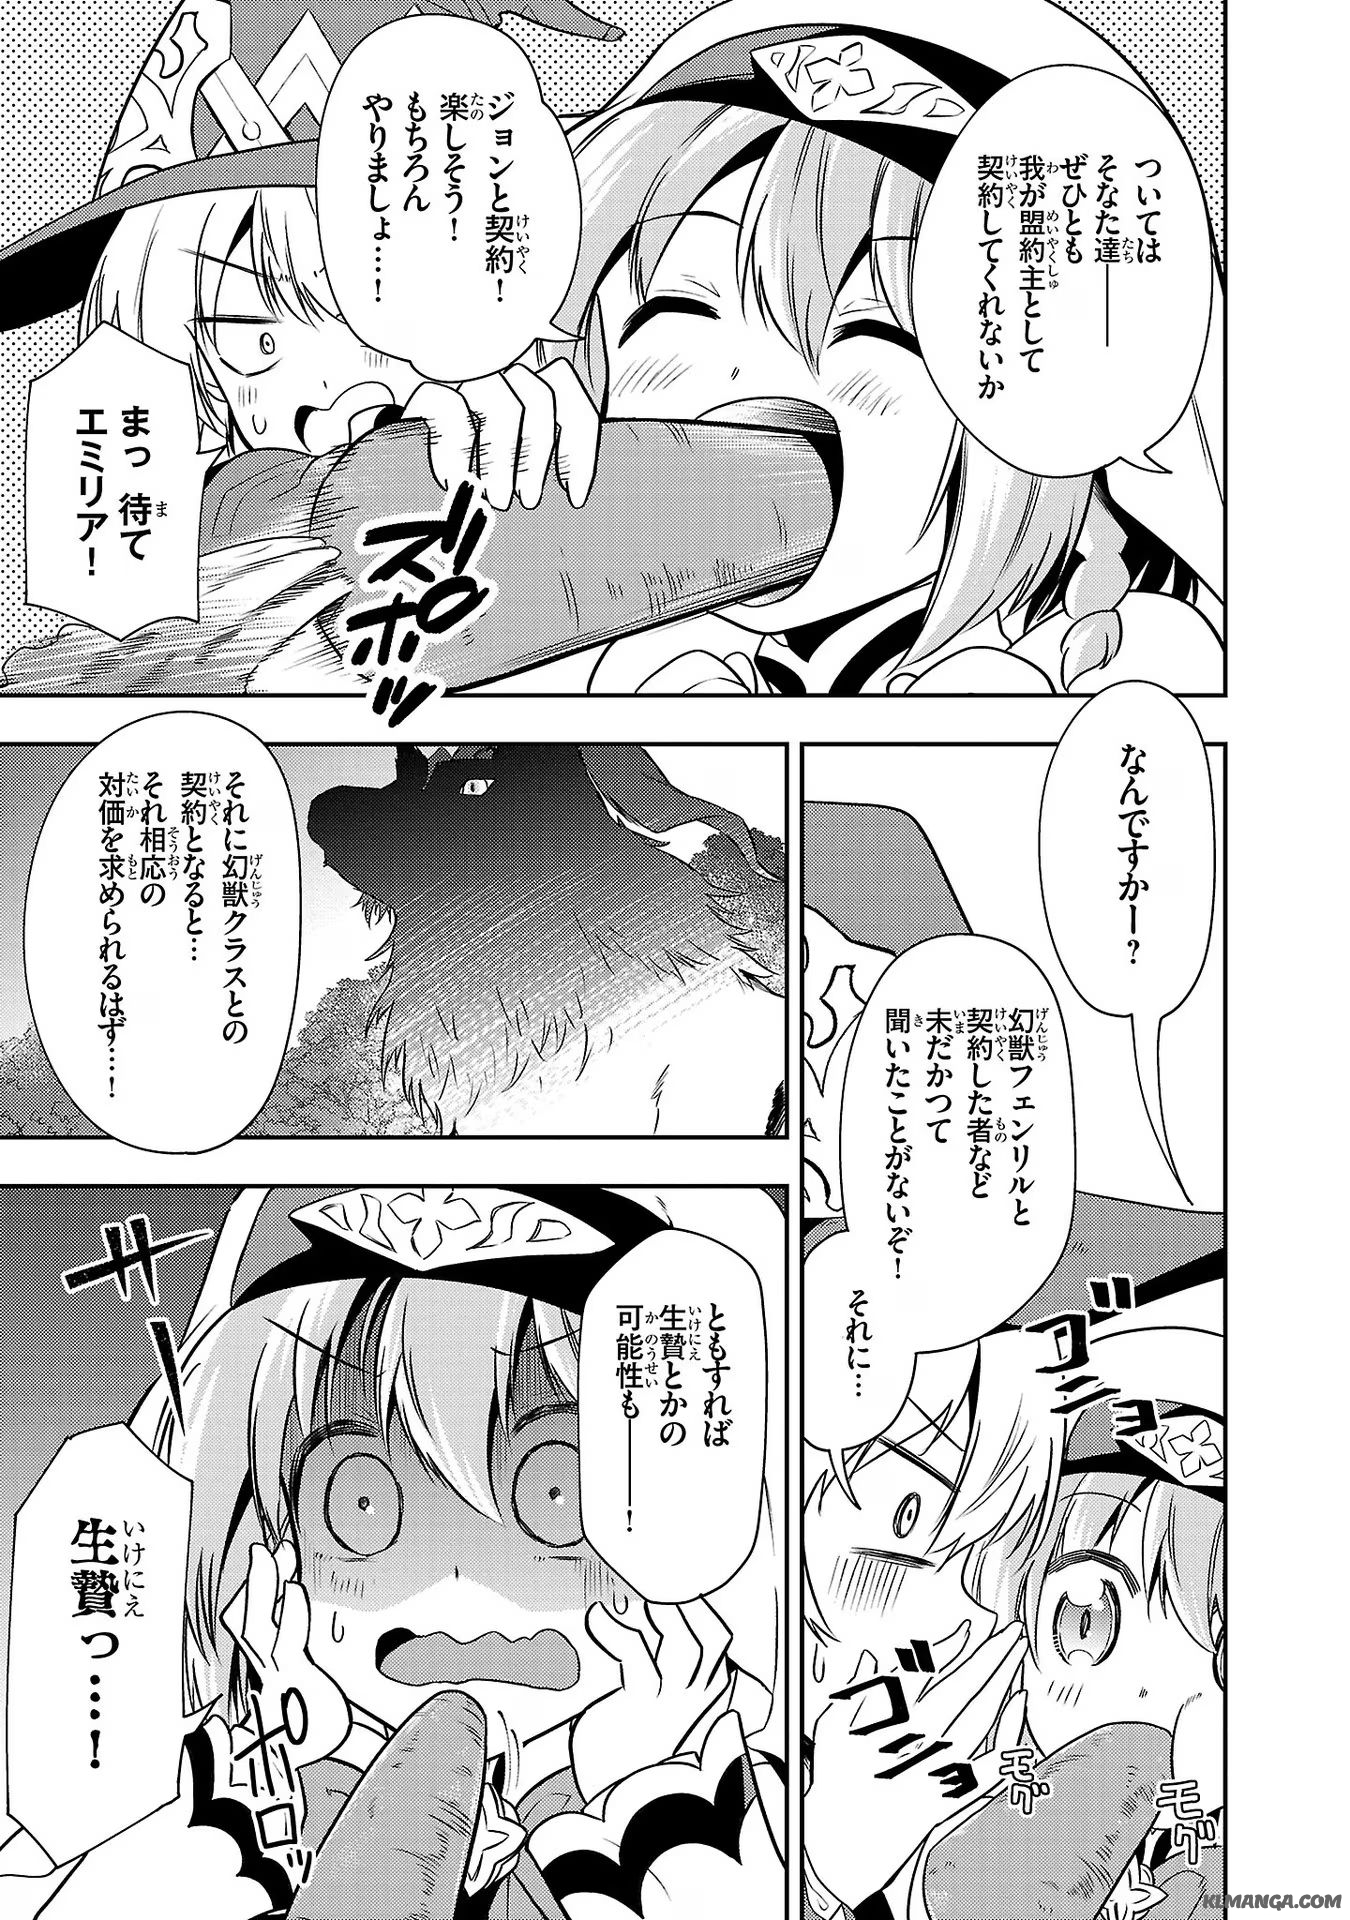 Hungry Saint and Full-Stomach Witch’s Slow Life in Another World! 腹ペコ聖女とまんぷく魔女の異世界スローライフ! 第12話 - Page 19